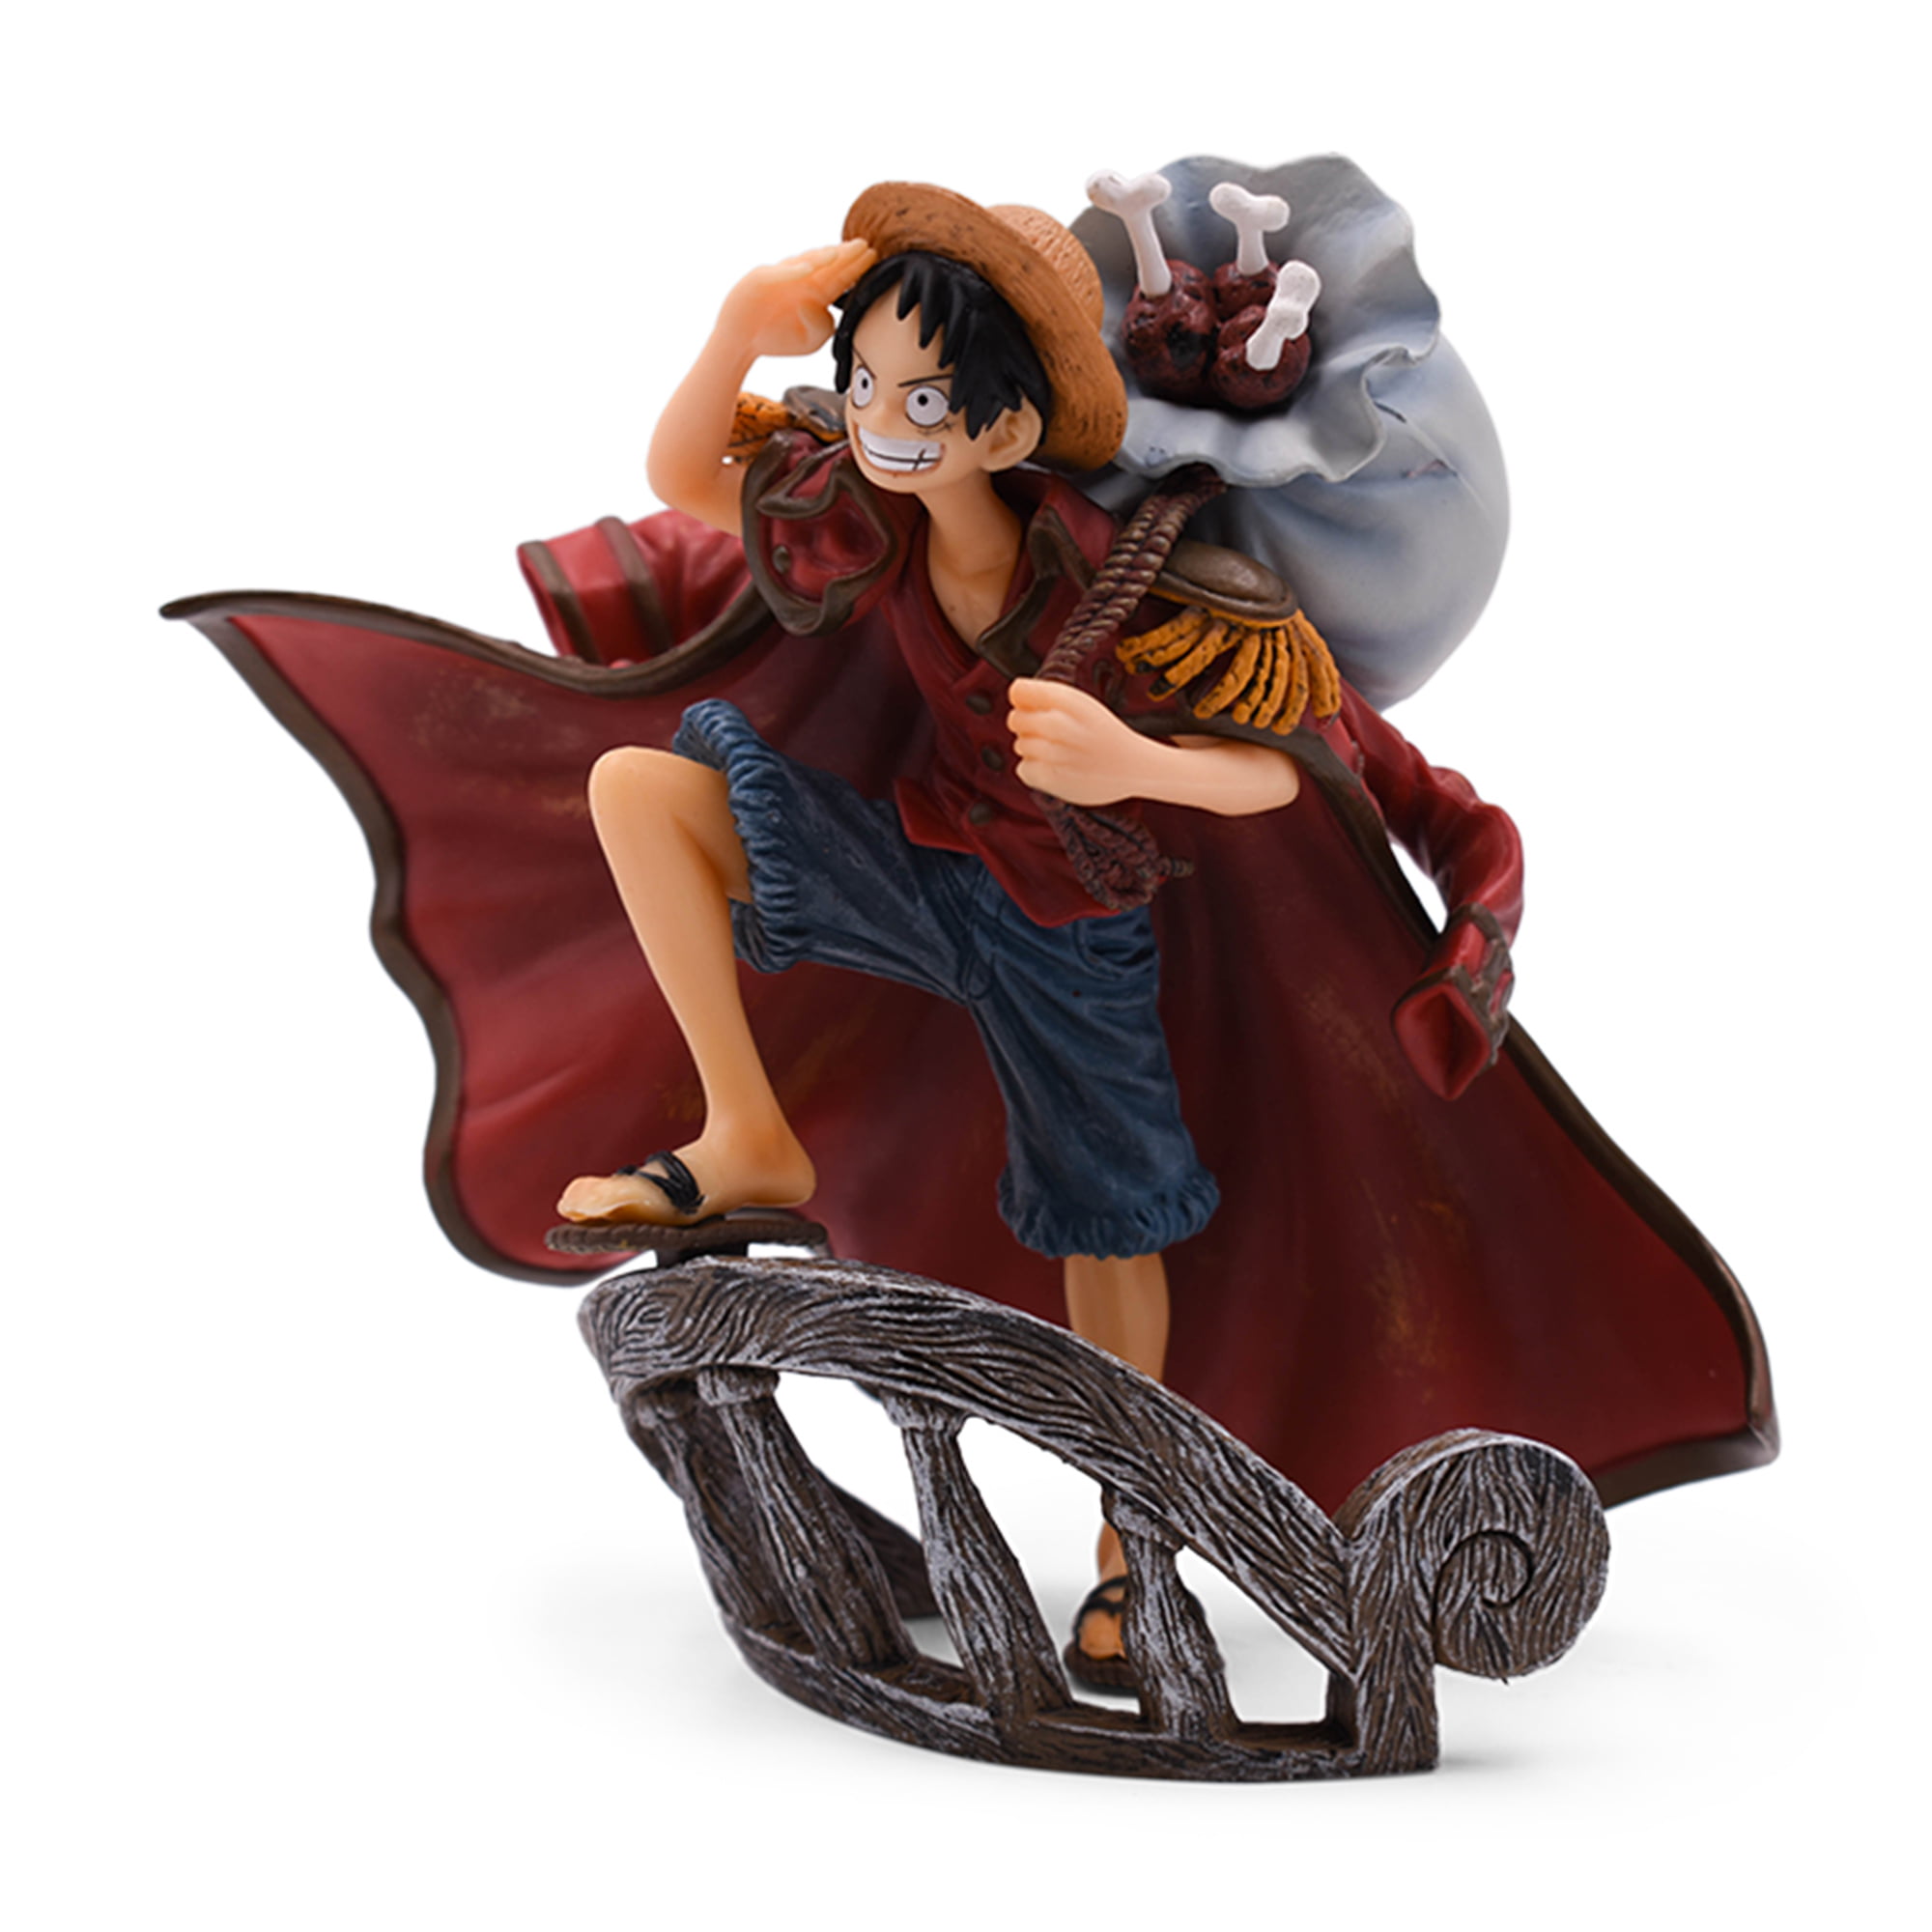 Bandai Original Figuarts Zero One Piece Paramount War Monkey D. Luffy  Action Anime Figure Collection Model Toy Gift For Children - AliExpress